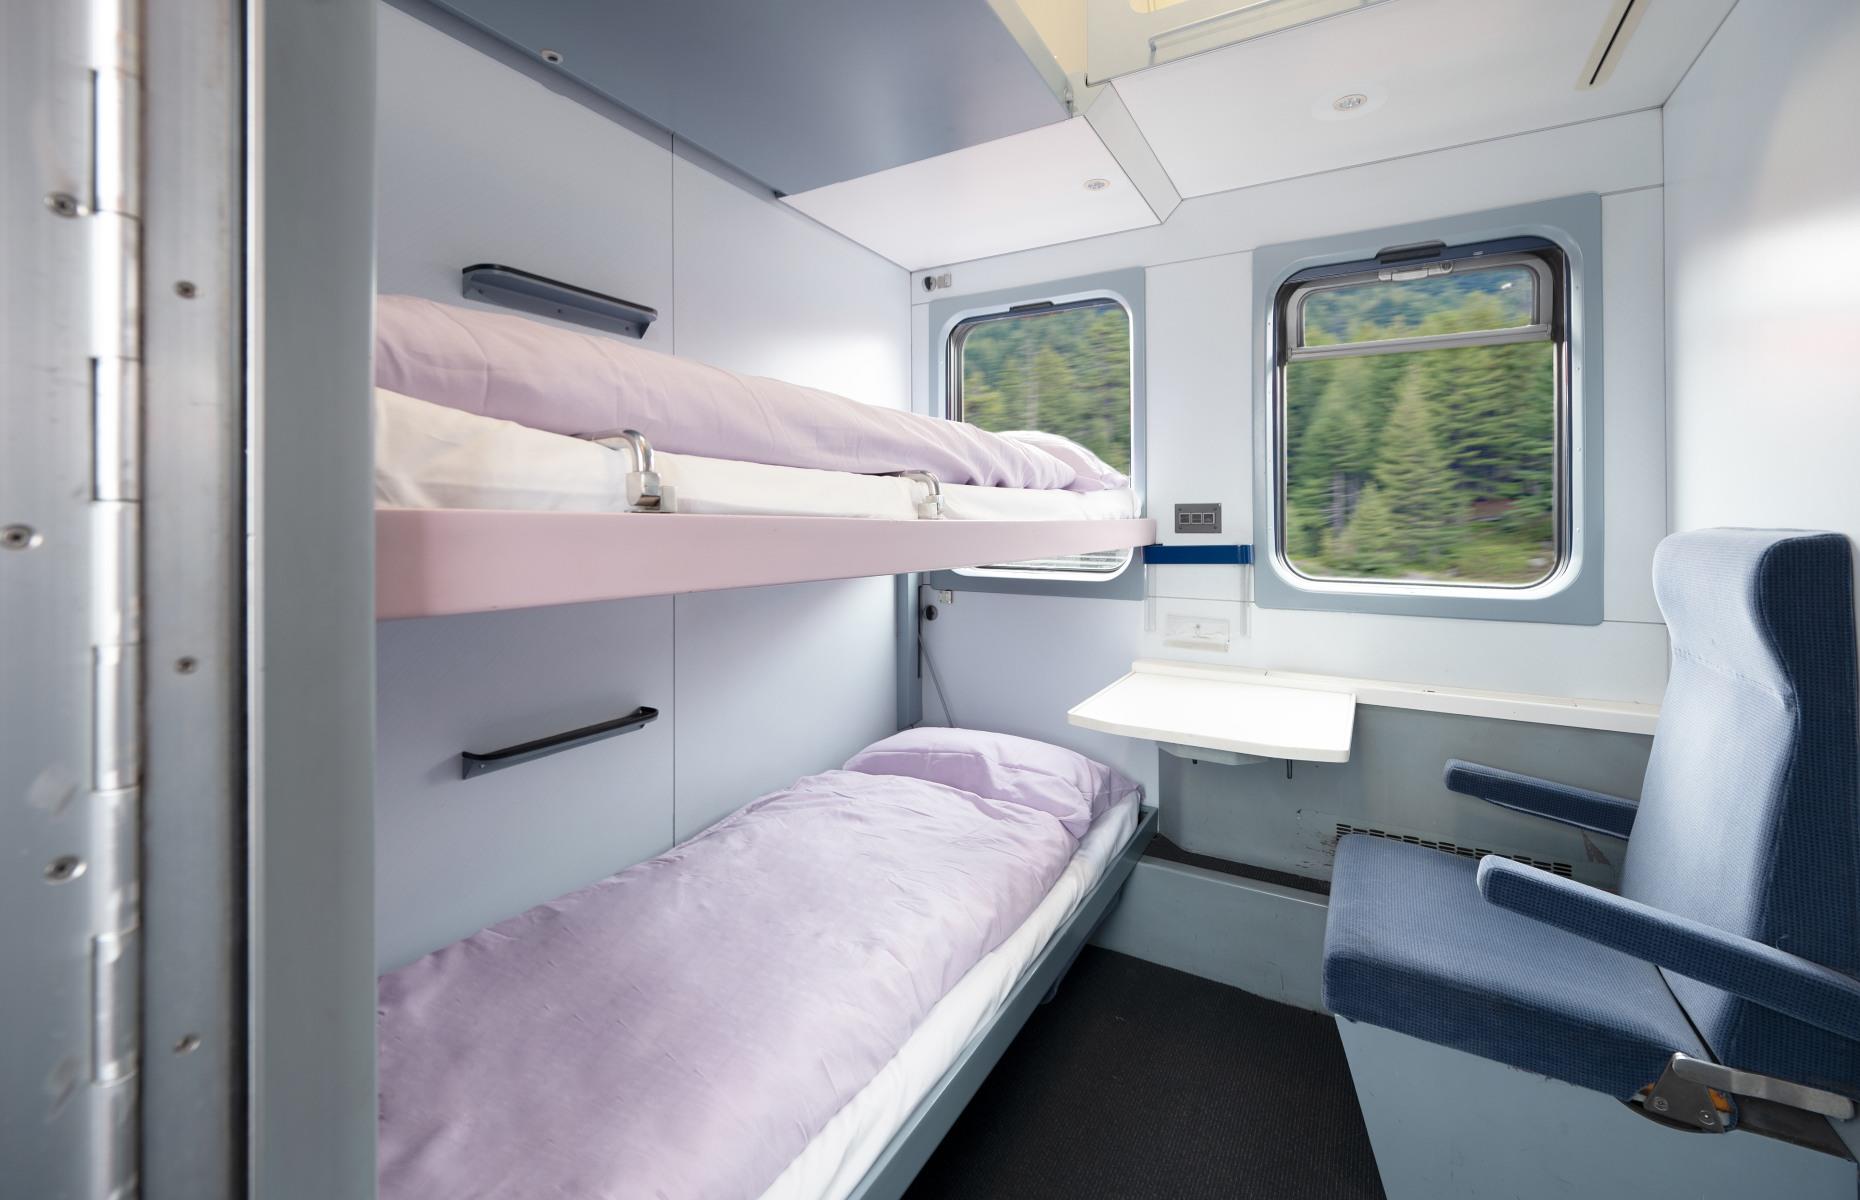 <p>Perhaps the most hotly anticipated launch of 2023 among the backpacking community is the <a href="https://www.europeansleeper.eu/en">European Sleeper</a> service linking the Belgian and Dutch cities of Brussels, Antwerp, Rotterdam and Amsterdam to the German capital. The inaugural journey chugged out of Brussels-Midi station on 25 May, signalling the beginning of the first direct overnight rail route between Brussels and Berlin in more than a decade. Passengers can book three different ticket options according to their budget, from cosy sleeping compartments (pictured) and convertible couchettes to reclining seats.</p>